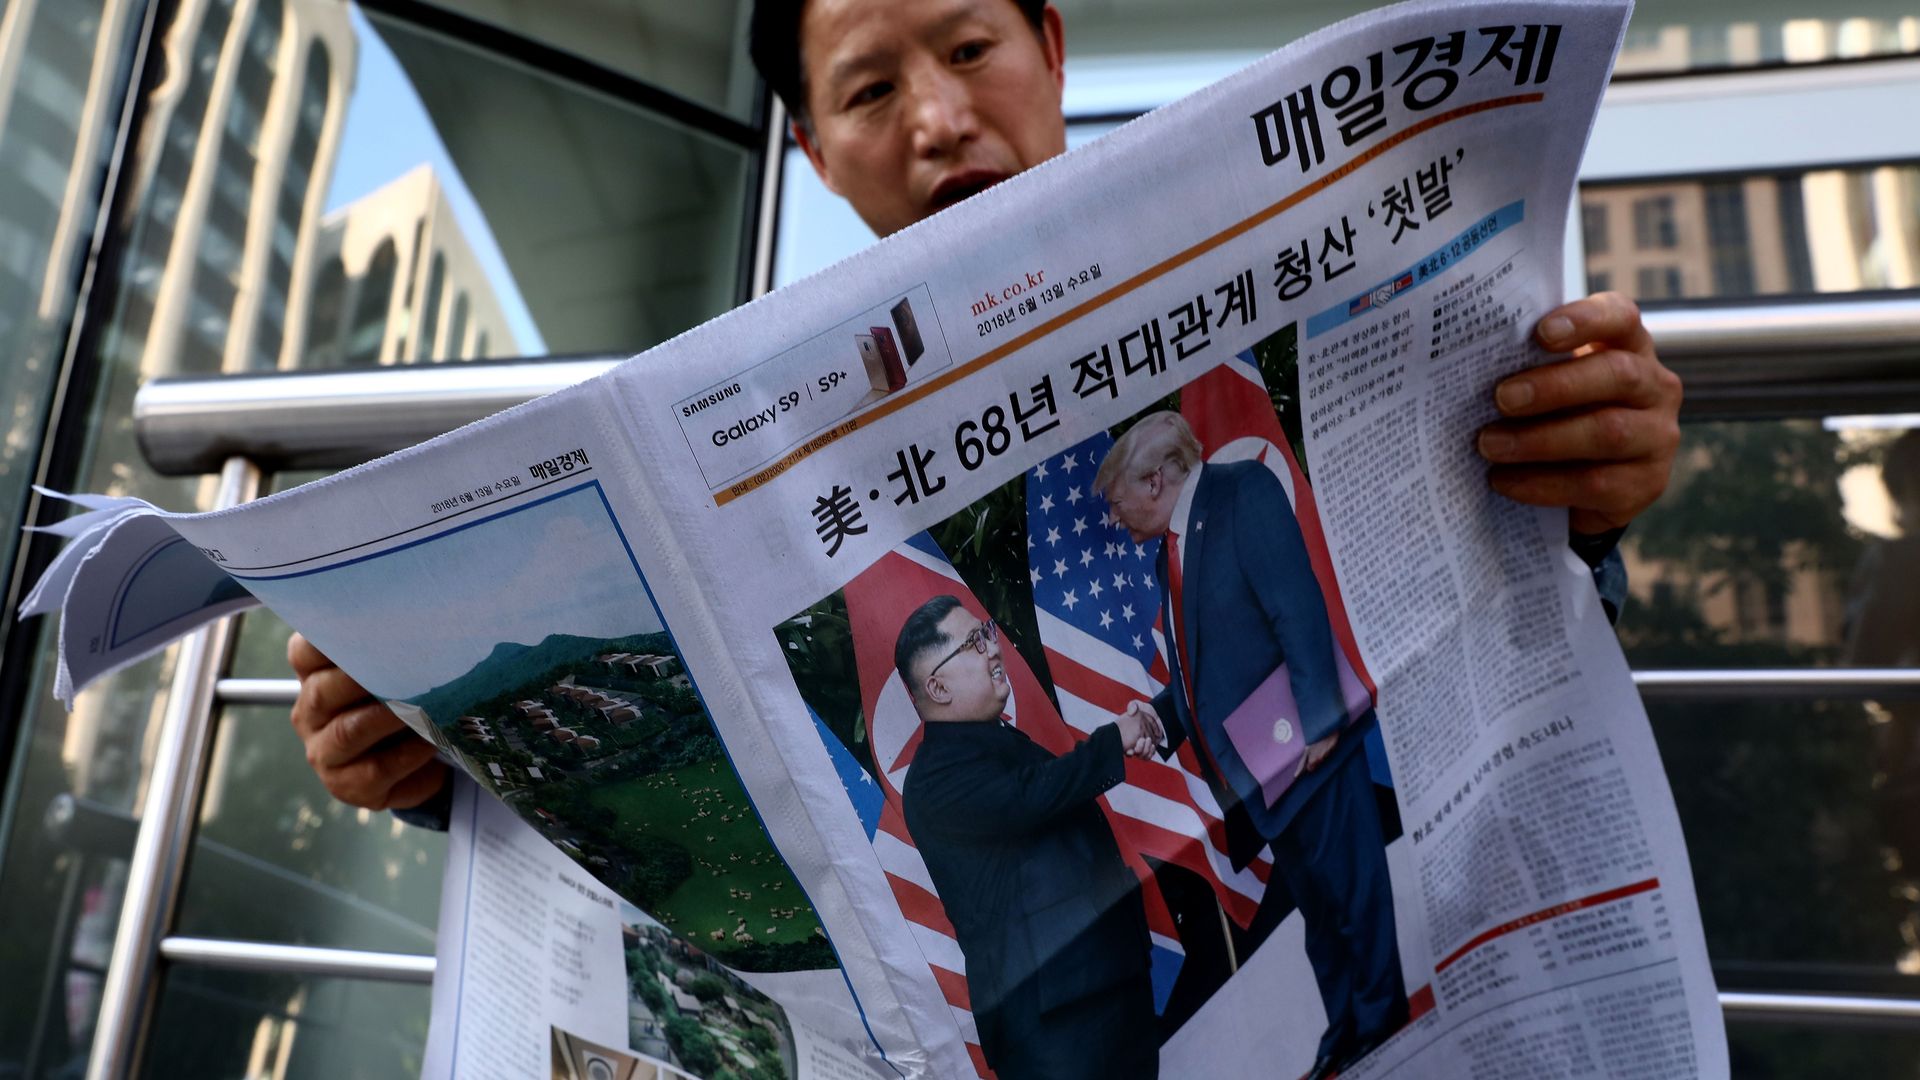 An Asian man reading a newspaper with a photo of Kim Jong-un and Donald Trump shaking hands on the front page